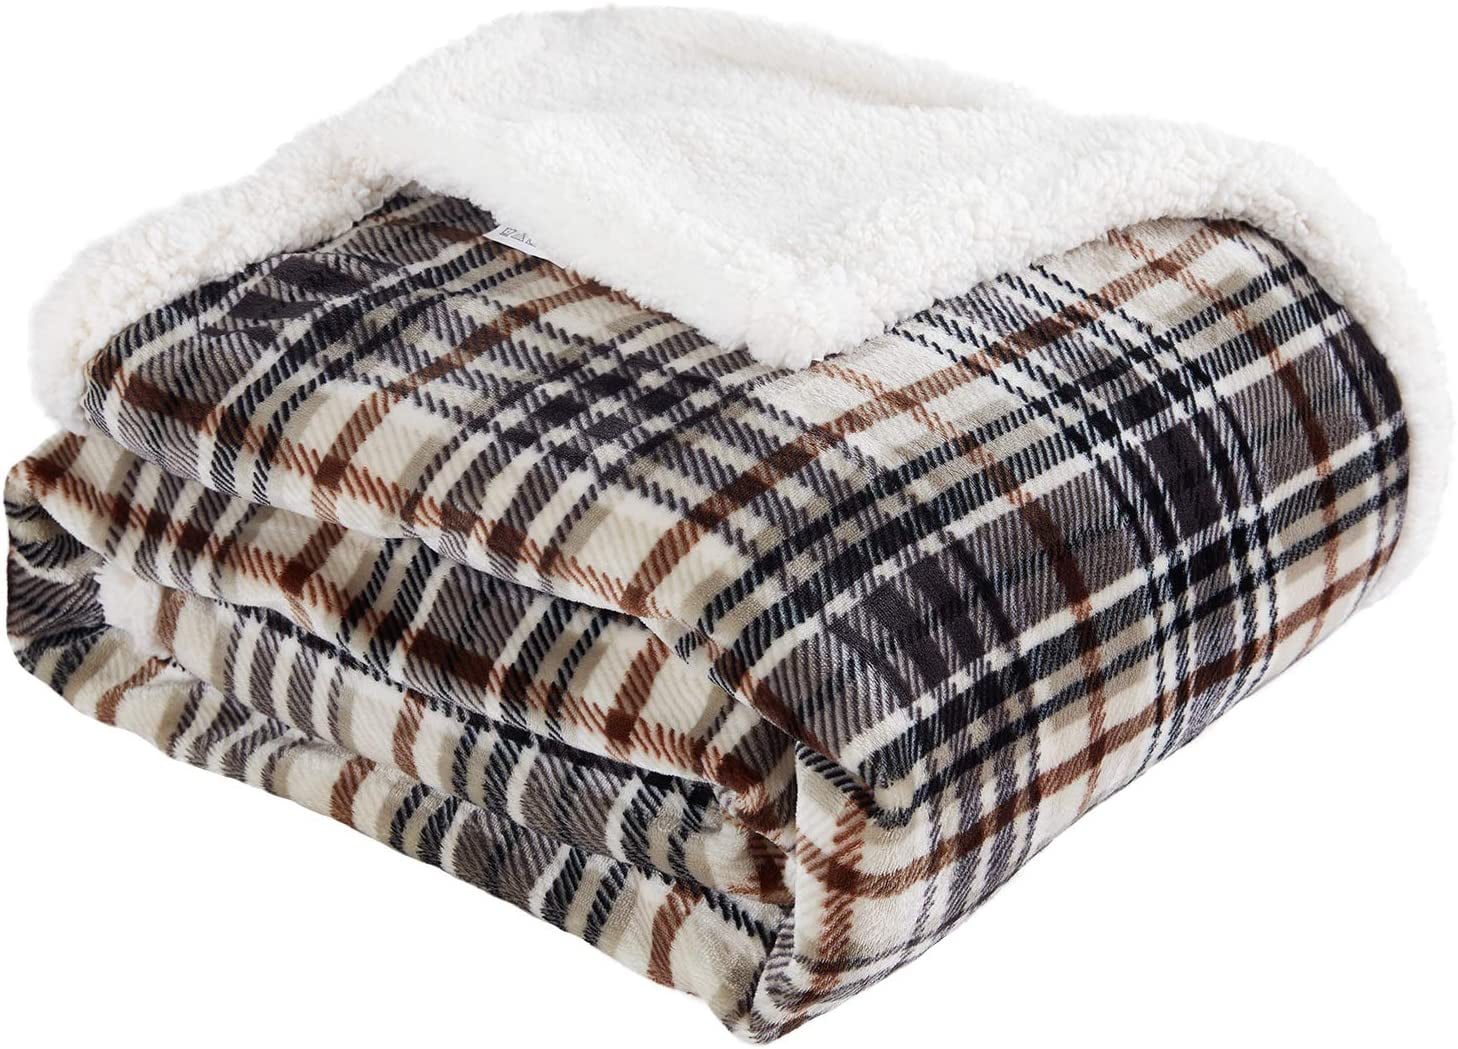 RACE CARS BOYS FLANNEL BLANKET WITH SHERPA 2 PC TWIN THICK SOFT AND WARM 